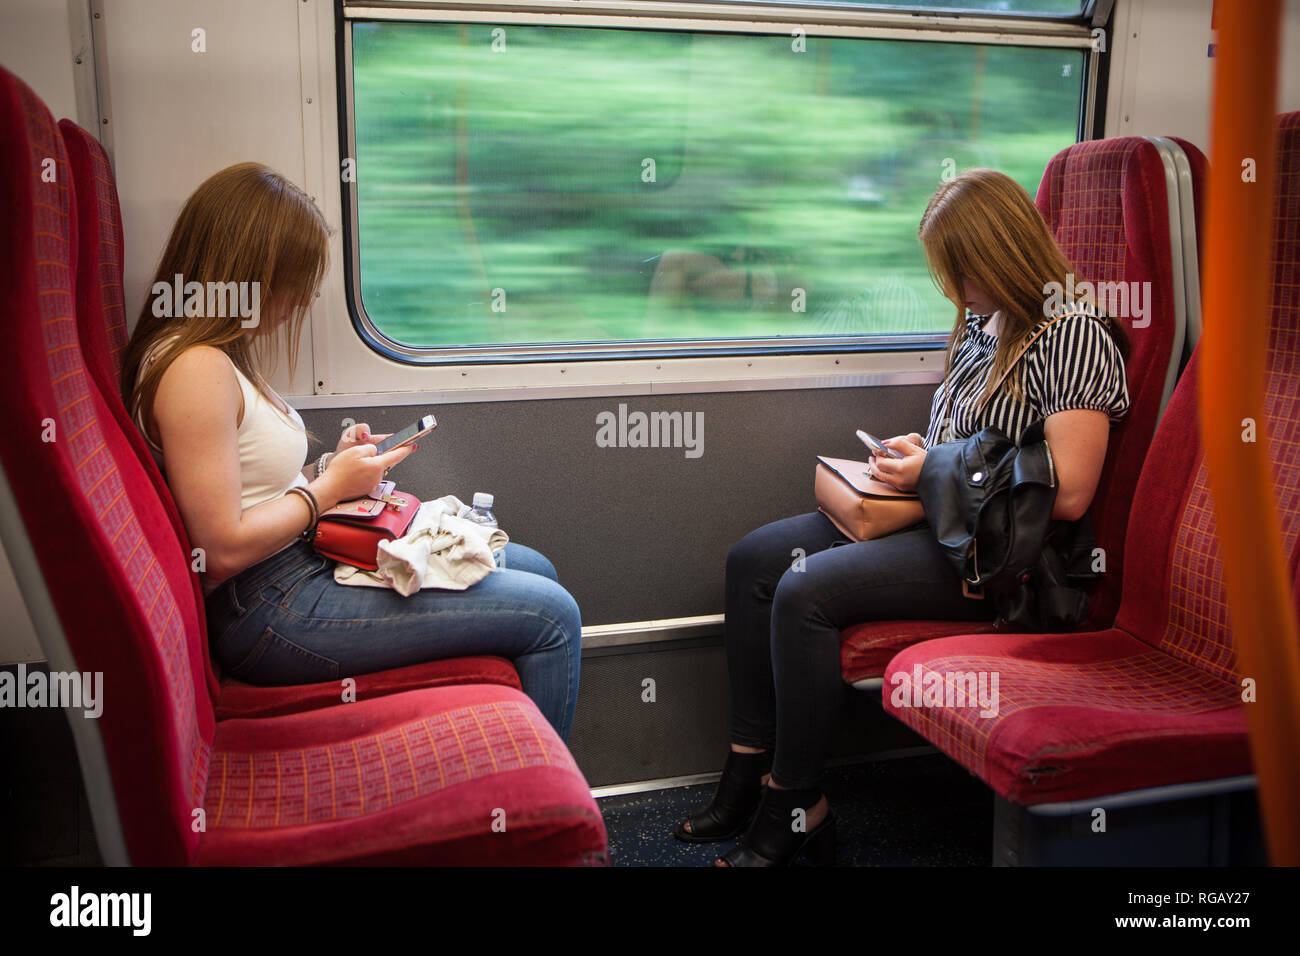 female twins in their 20's sitting oppossite on a train texting Stock Photo